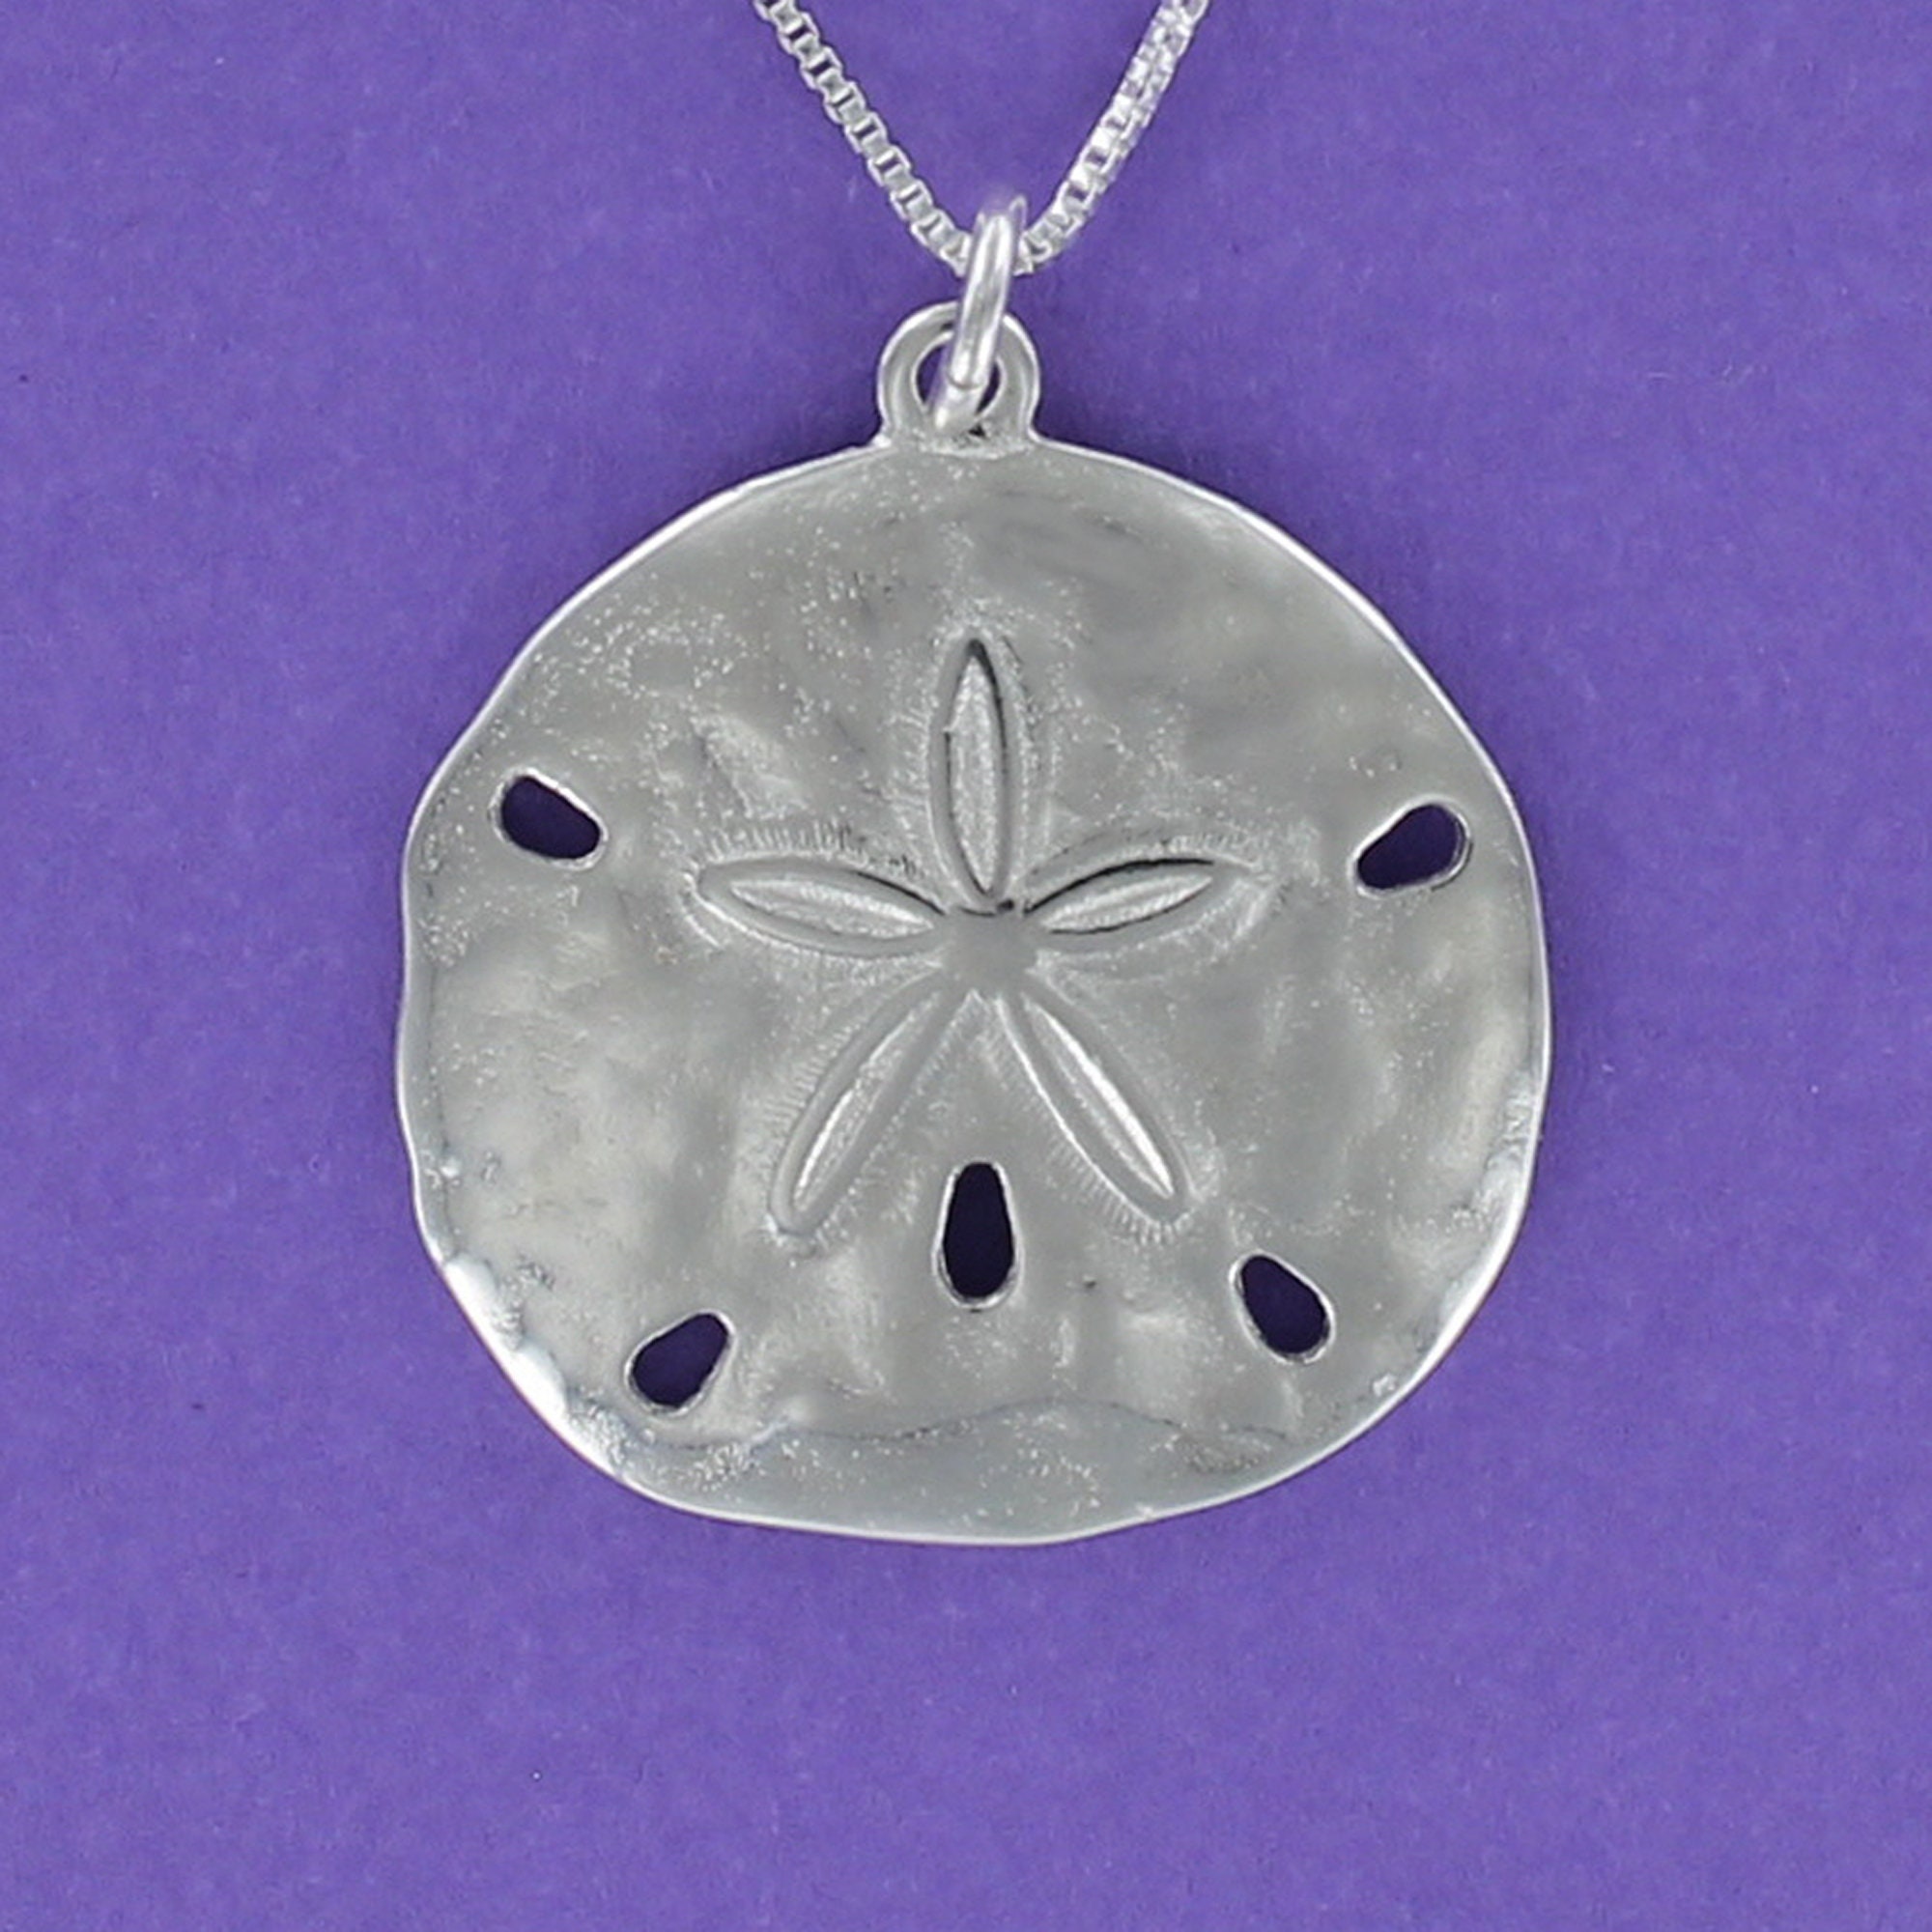 Sand Dollar Clasp - Sterling Silver 925 New Used with Convertible